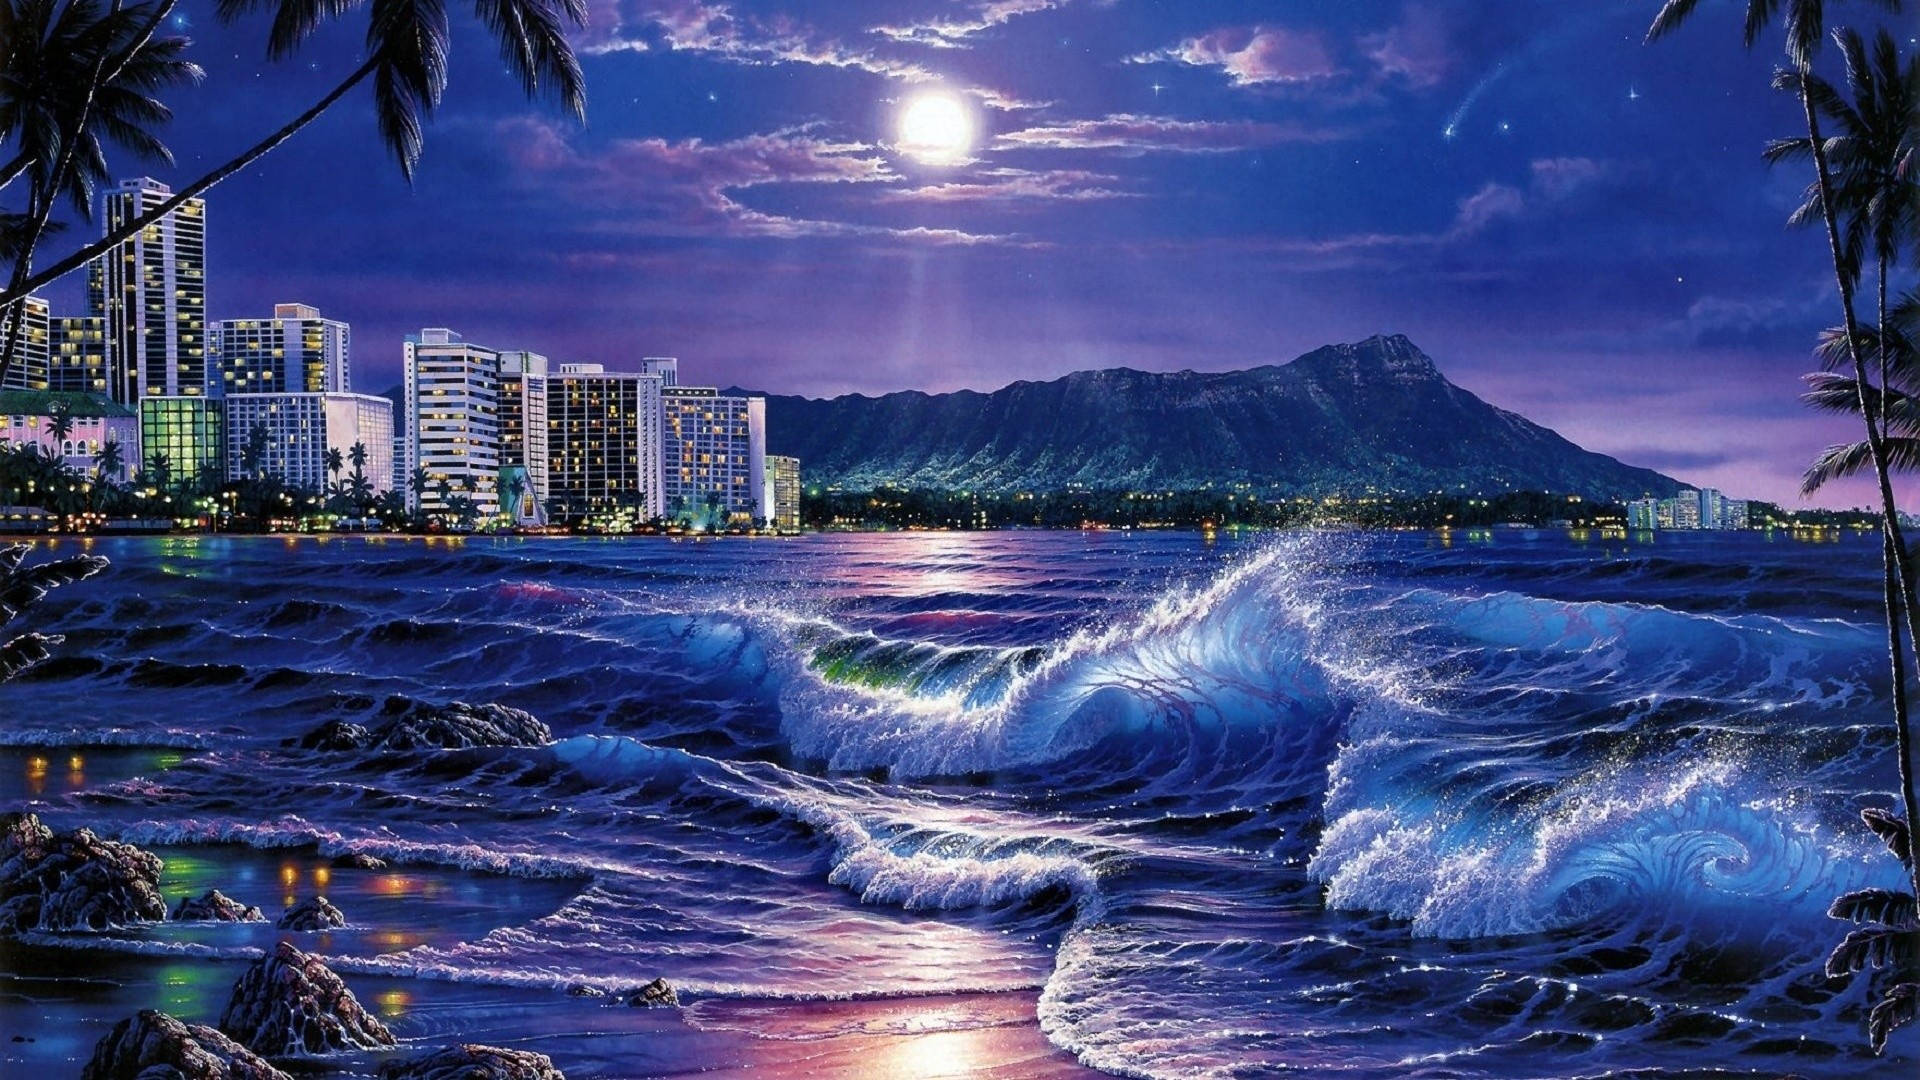 City By The Beach Night Wallpaper